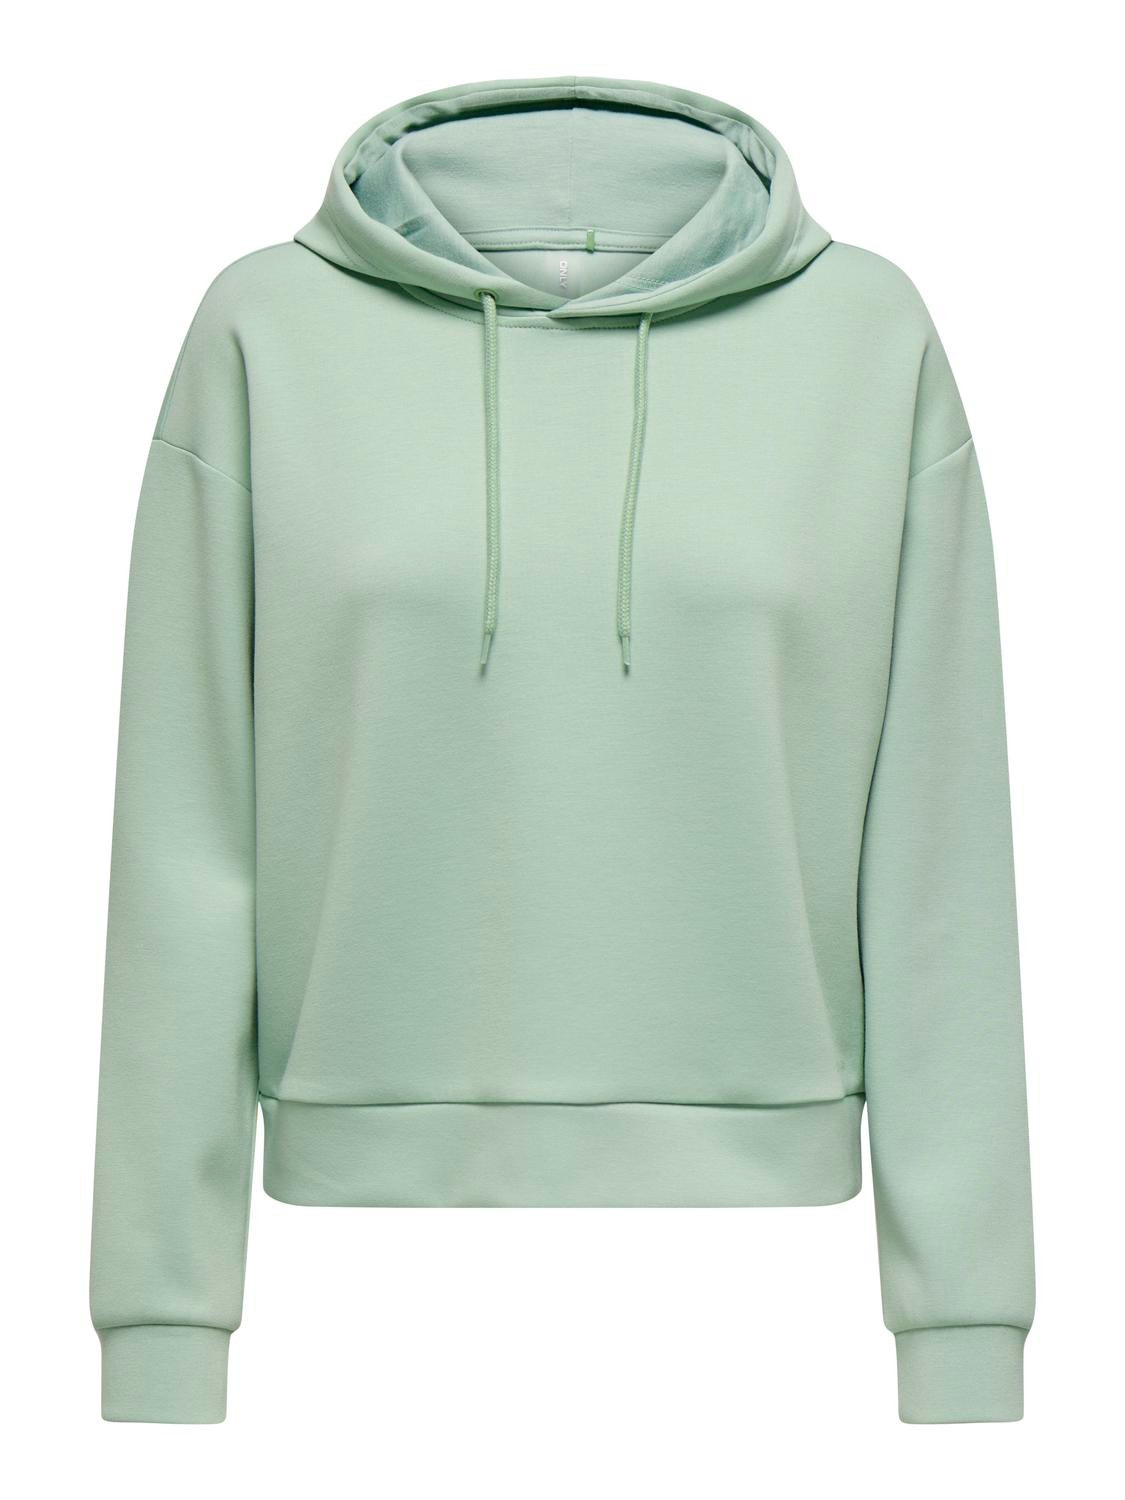 ONLY Couleur unie Sweat à capuche -Frosty Green - 15245850